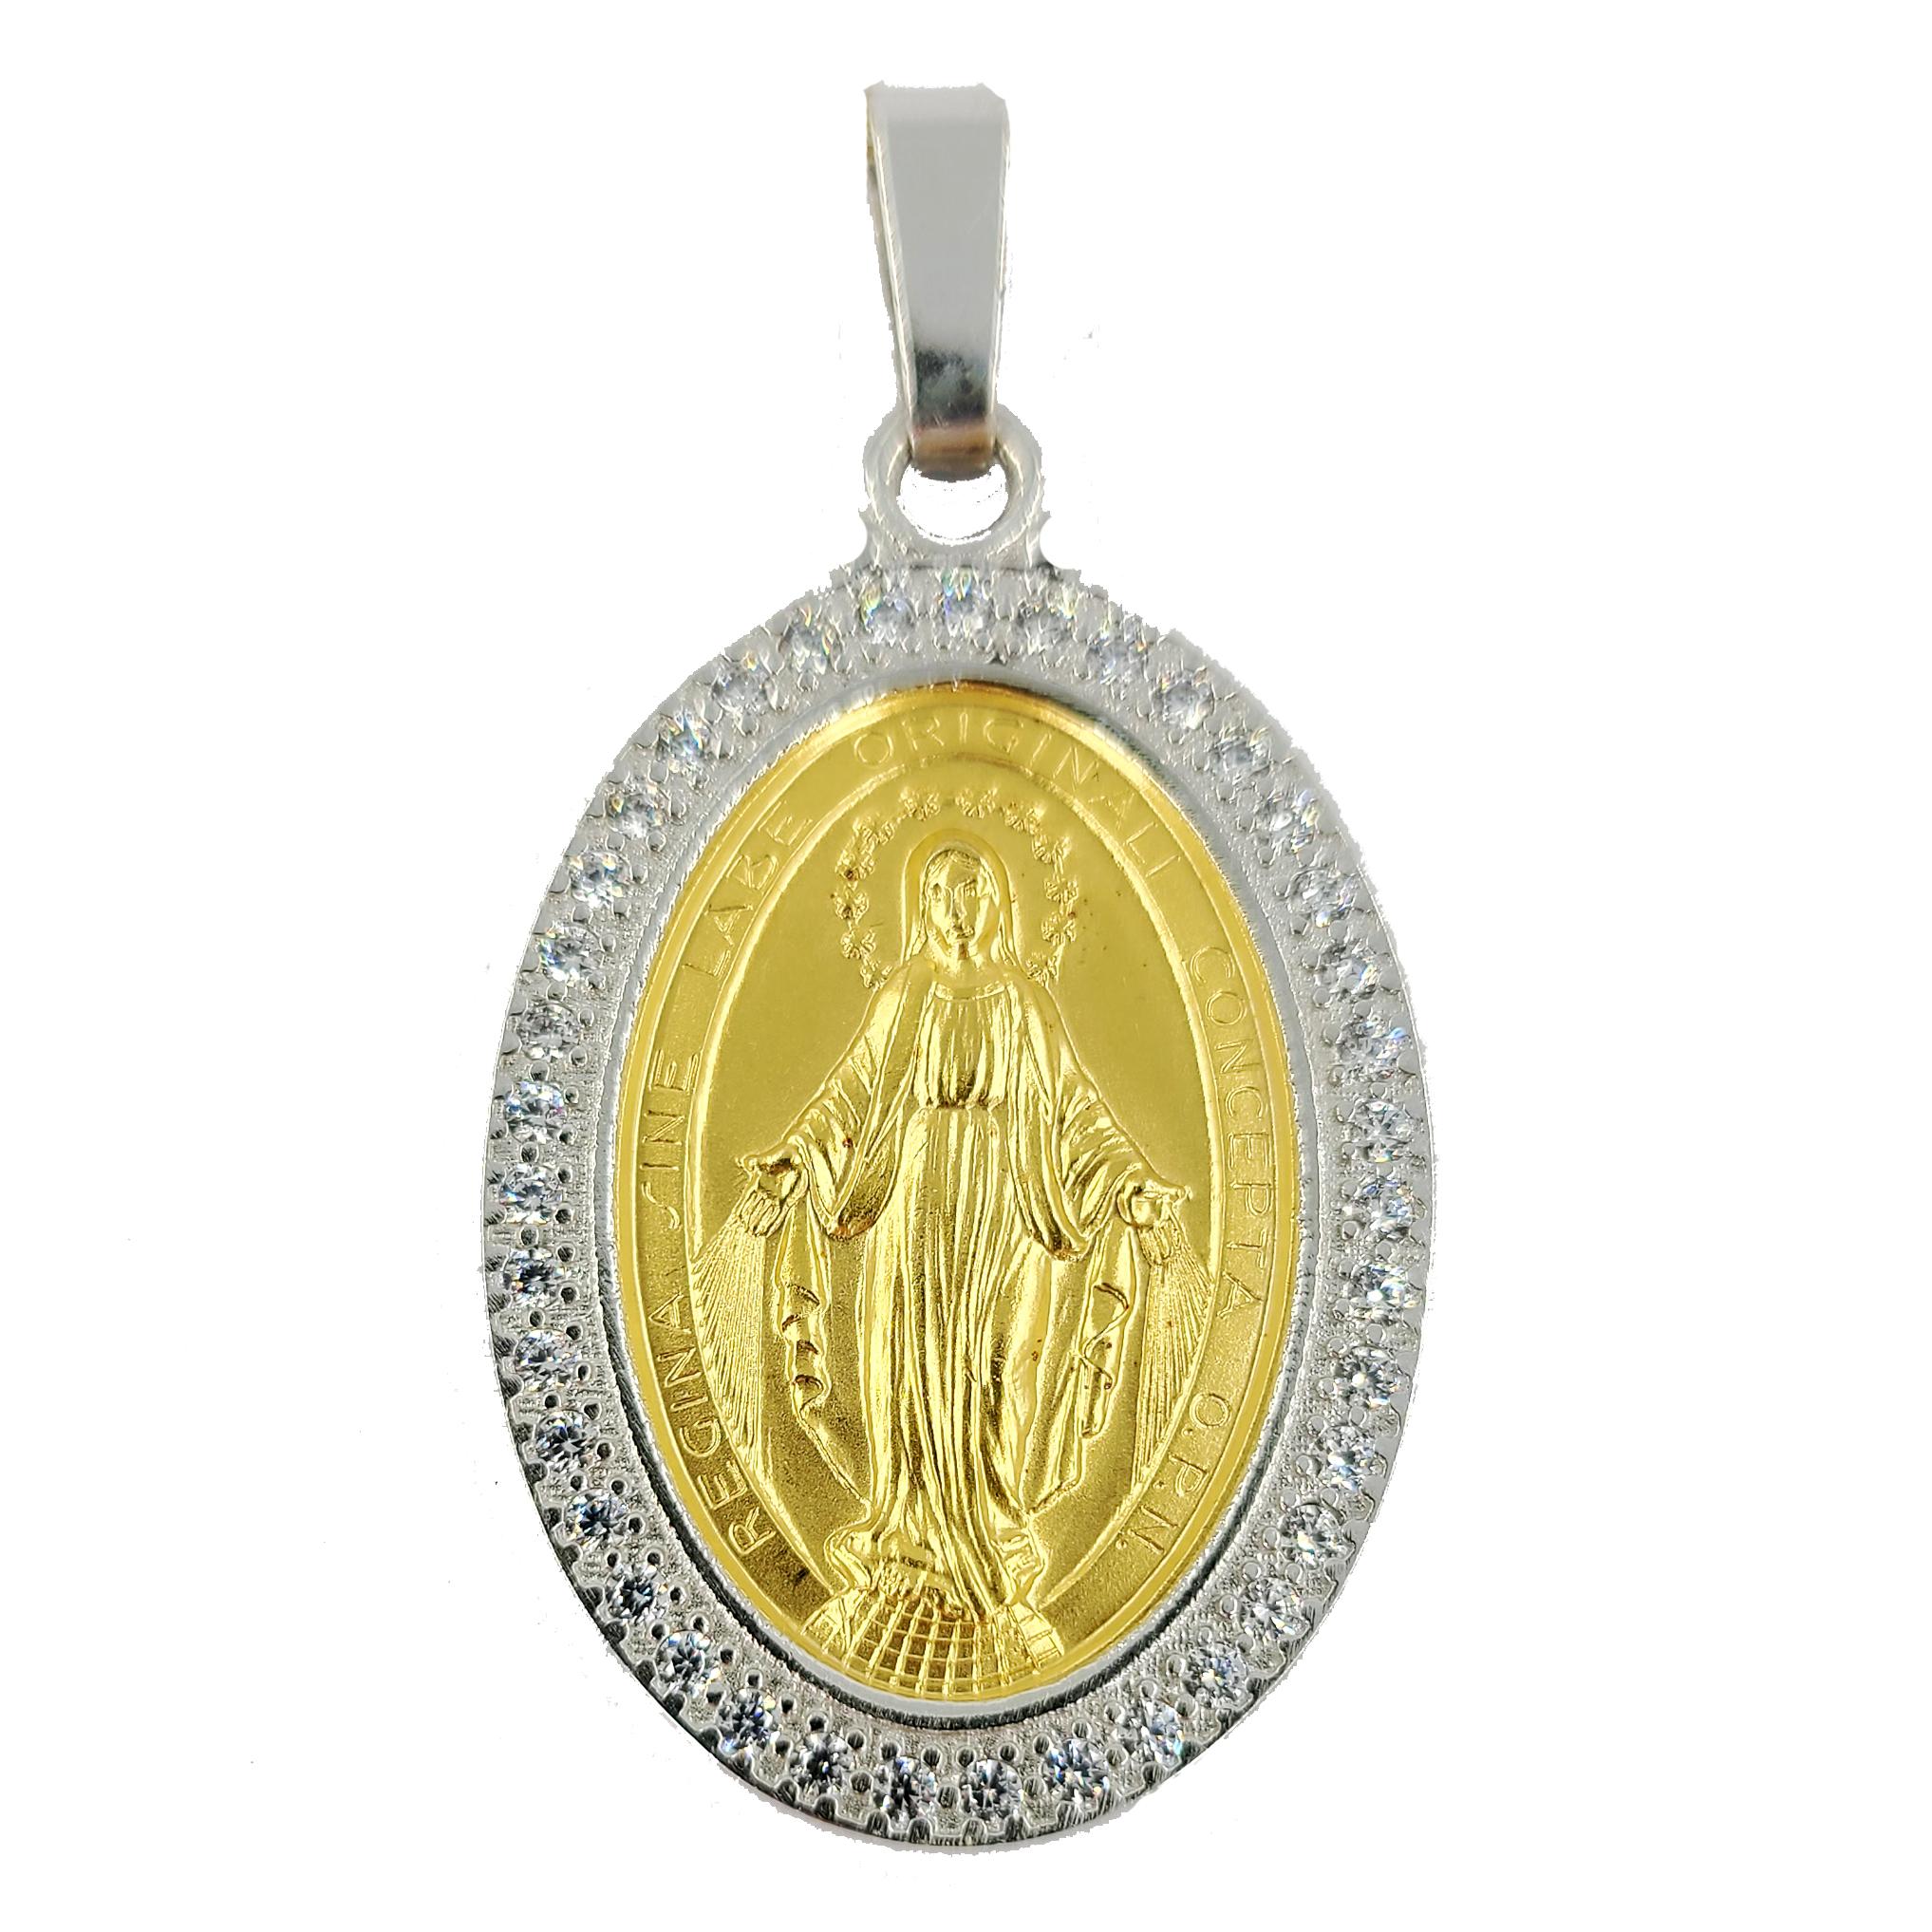 18 Karat Yellow & White Gold Necklace Featuring A Brushed Finish Oval Virgin Mary Pendant Set With 40 Round Diamonds Of VS Clarity & G Color Totaling Approximately 0.60 Carats. Chain Is 16 Inches Long & Pendant Is 1.75 Inches Long. Finished Weight